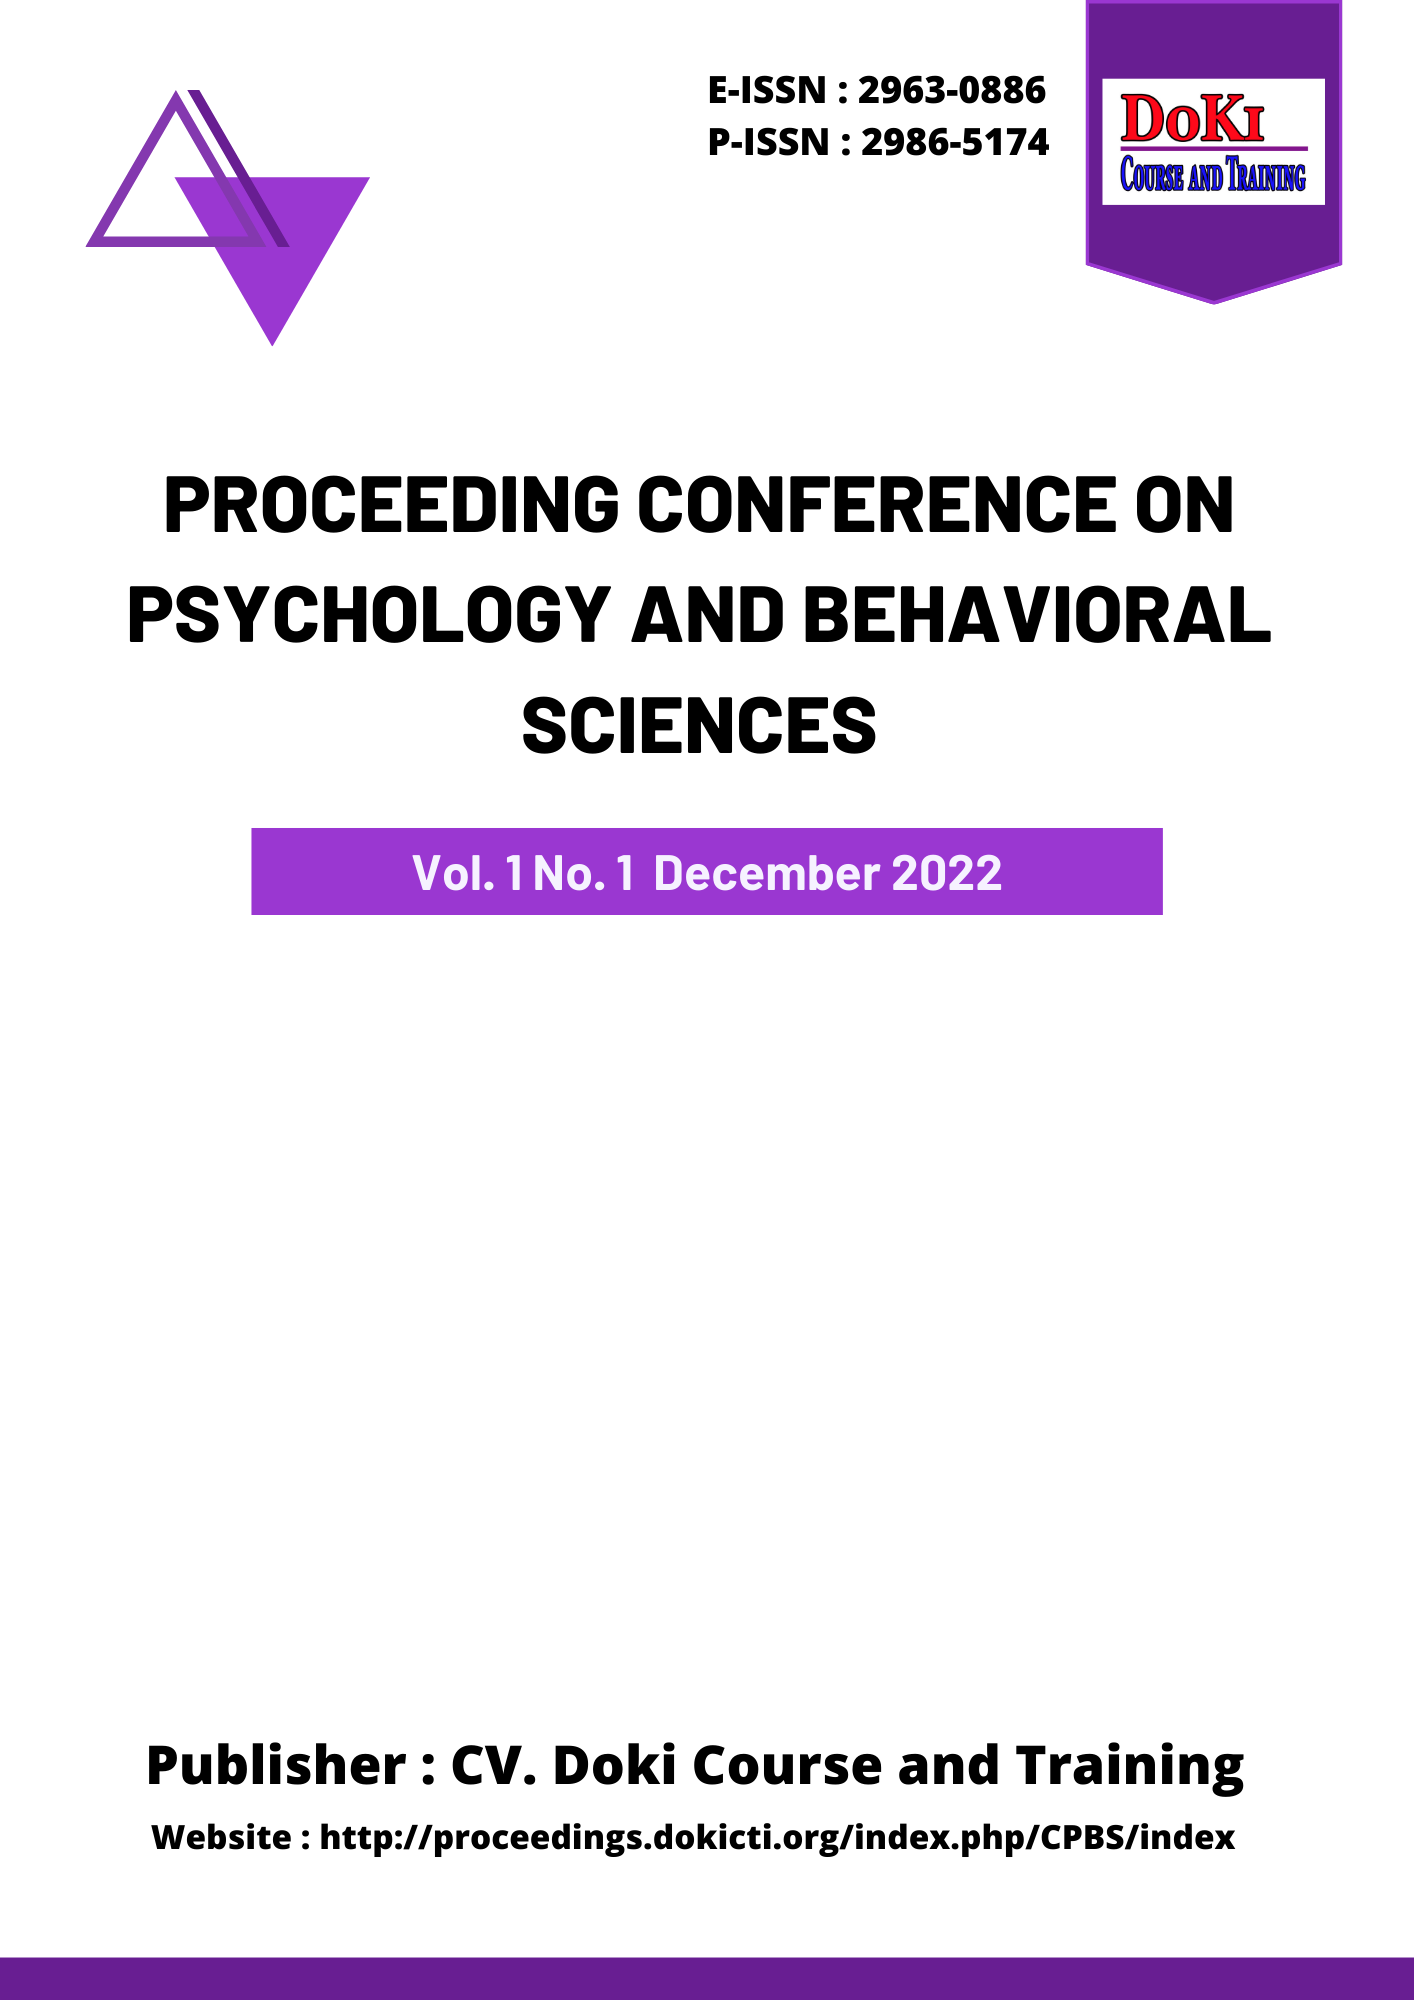 					View Vol. 1 (2022): Proceeding Conference on Pscyhology and Behavioral Sciences
				